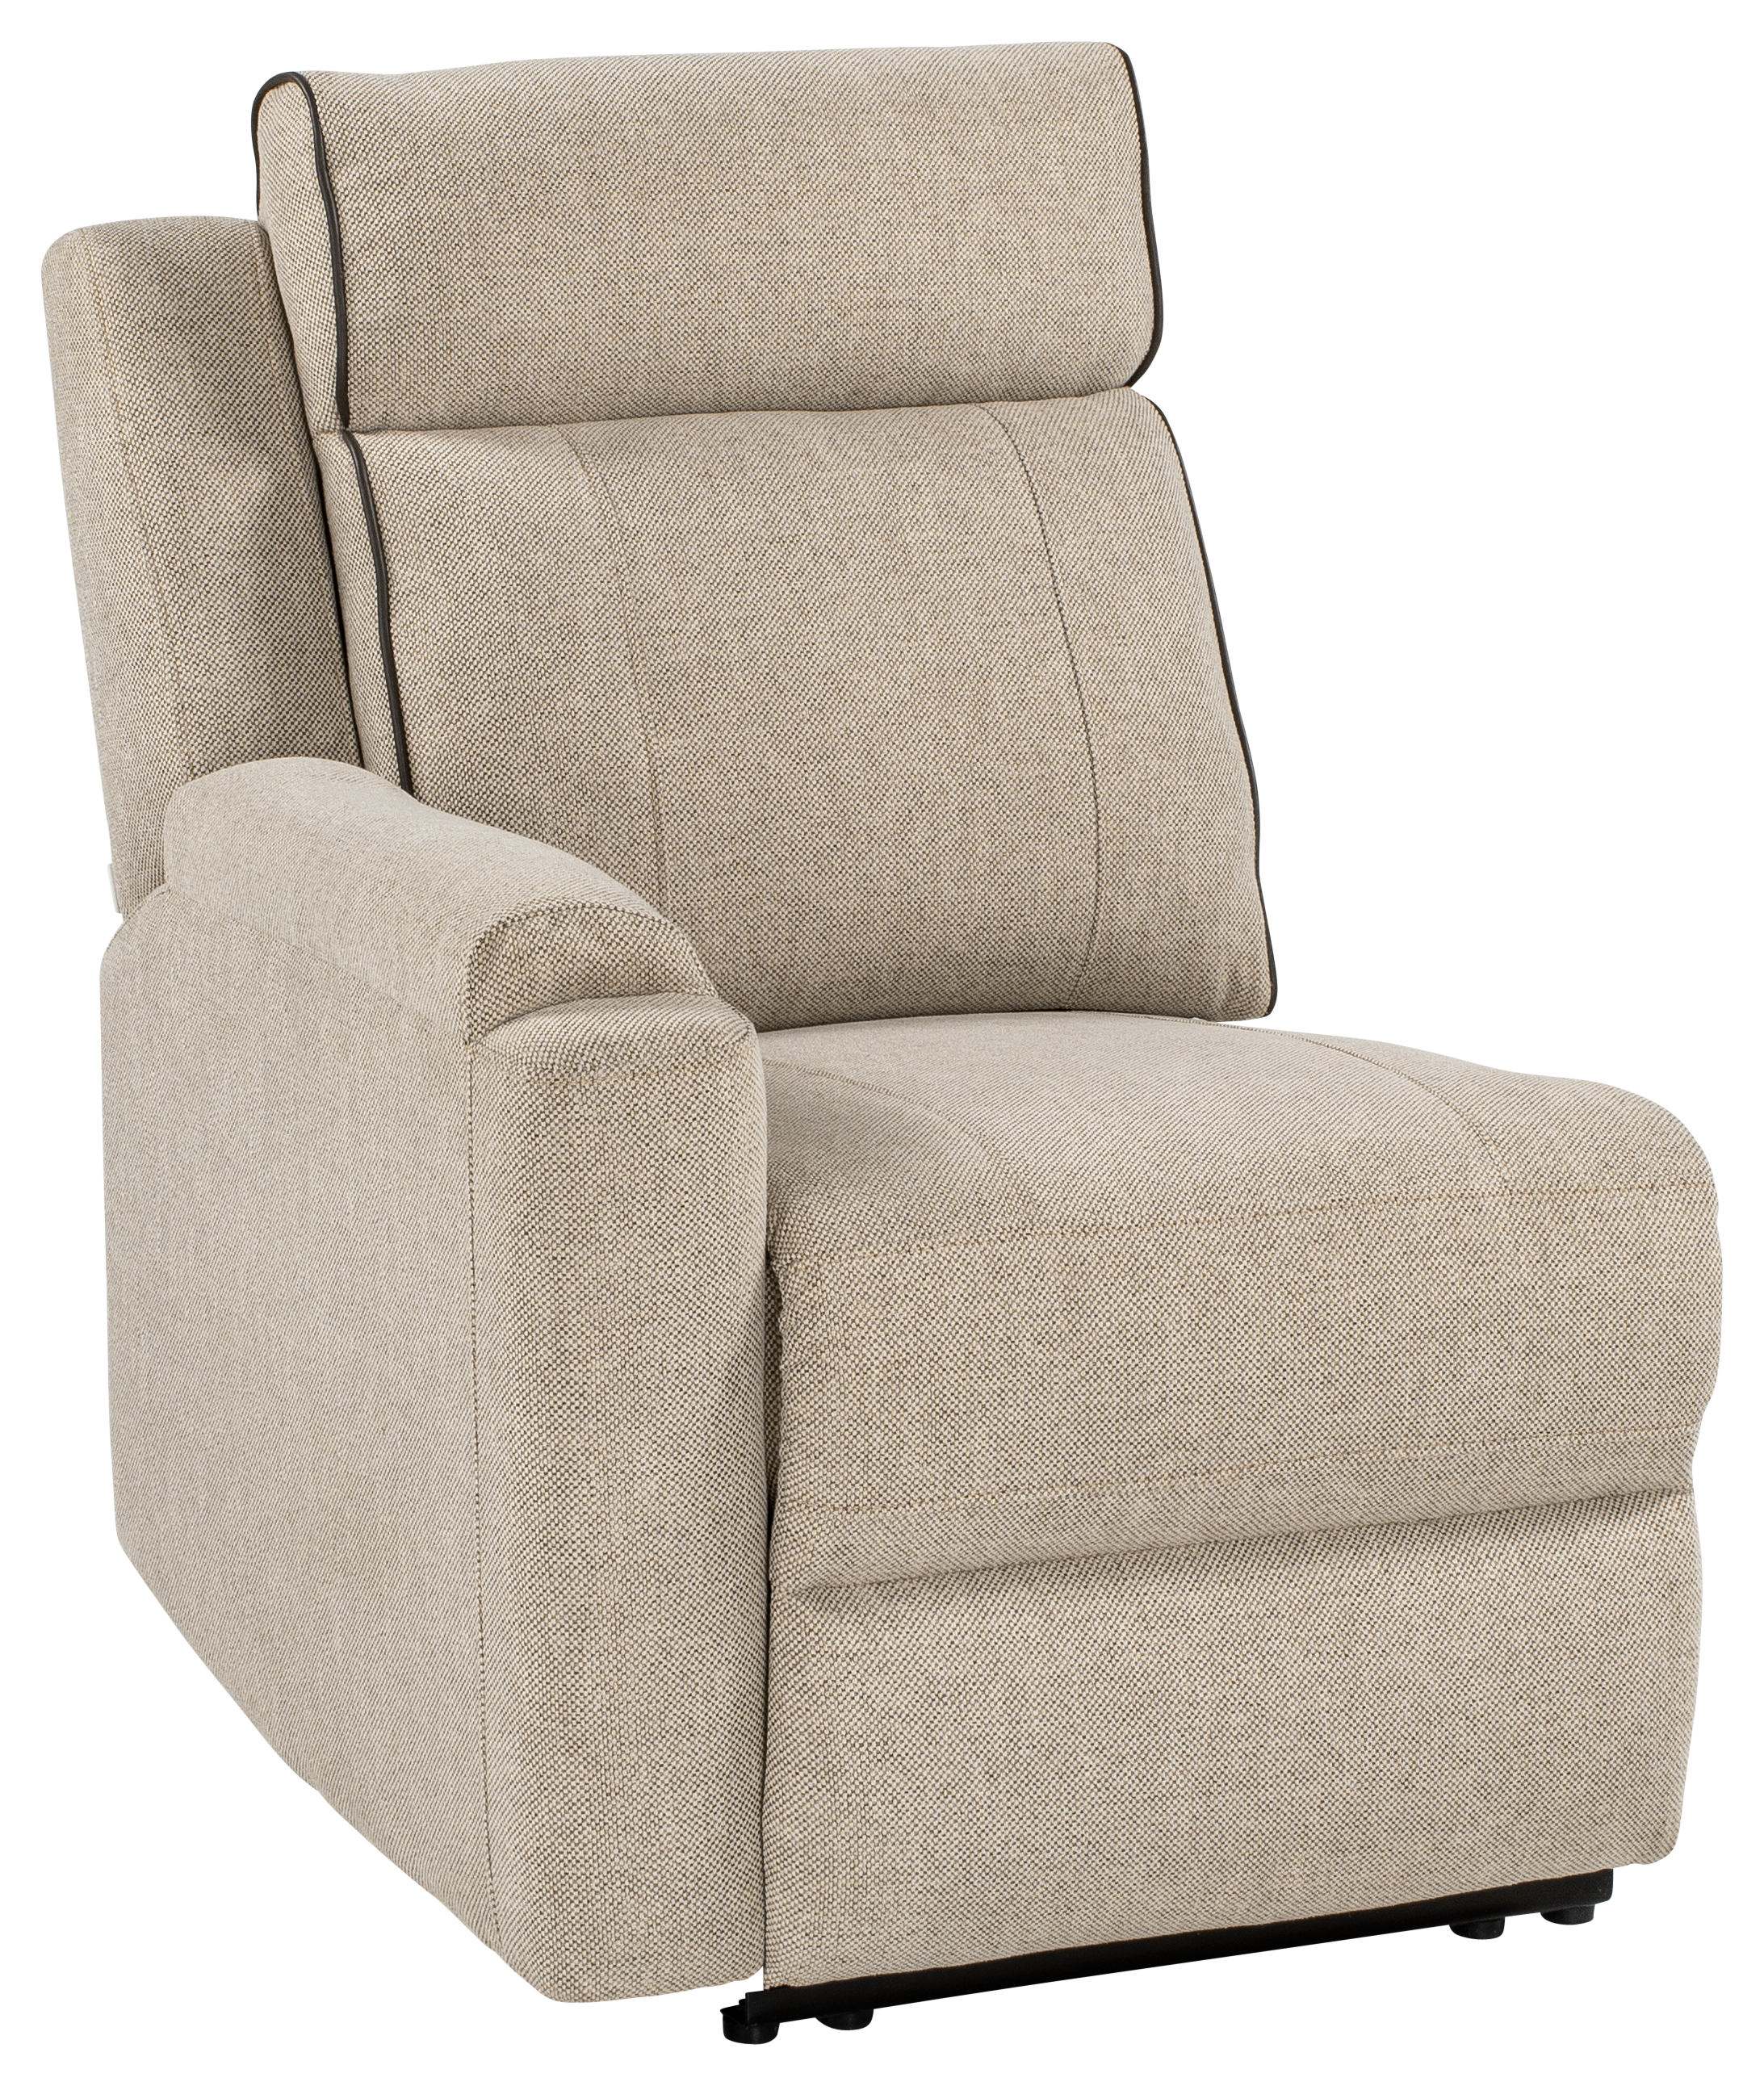 Thomas Payne Norlina RV Furniture Collection Heritage Series Single-Arm Recliners